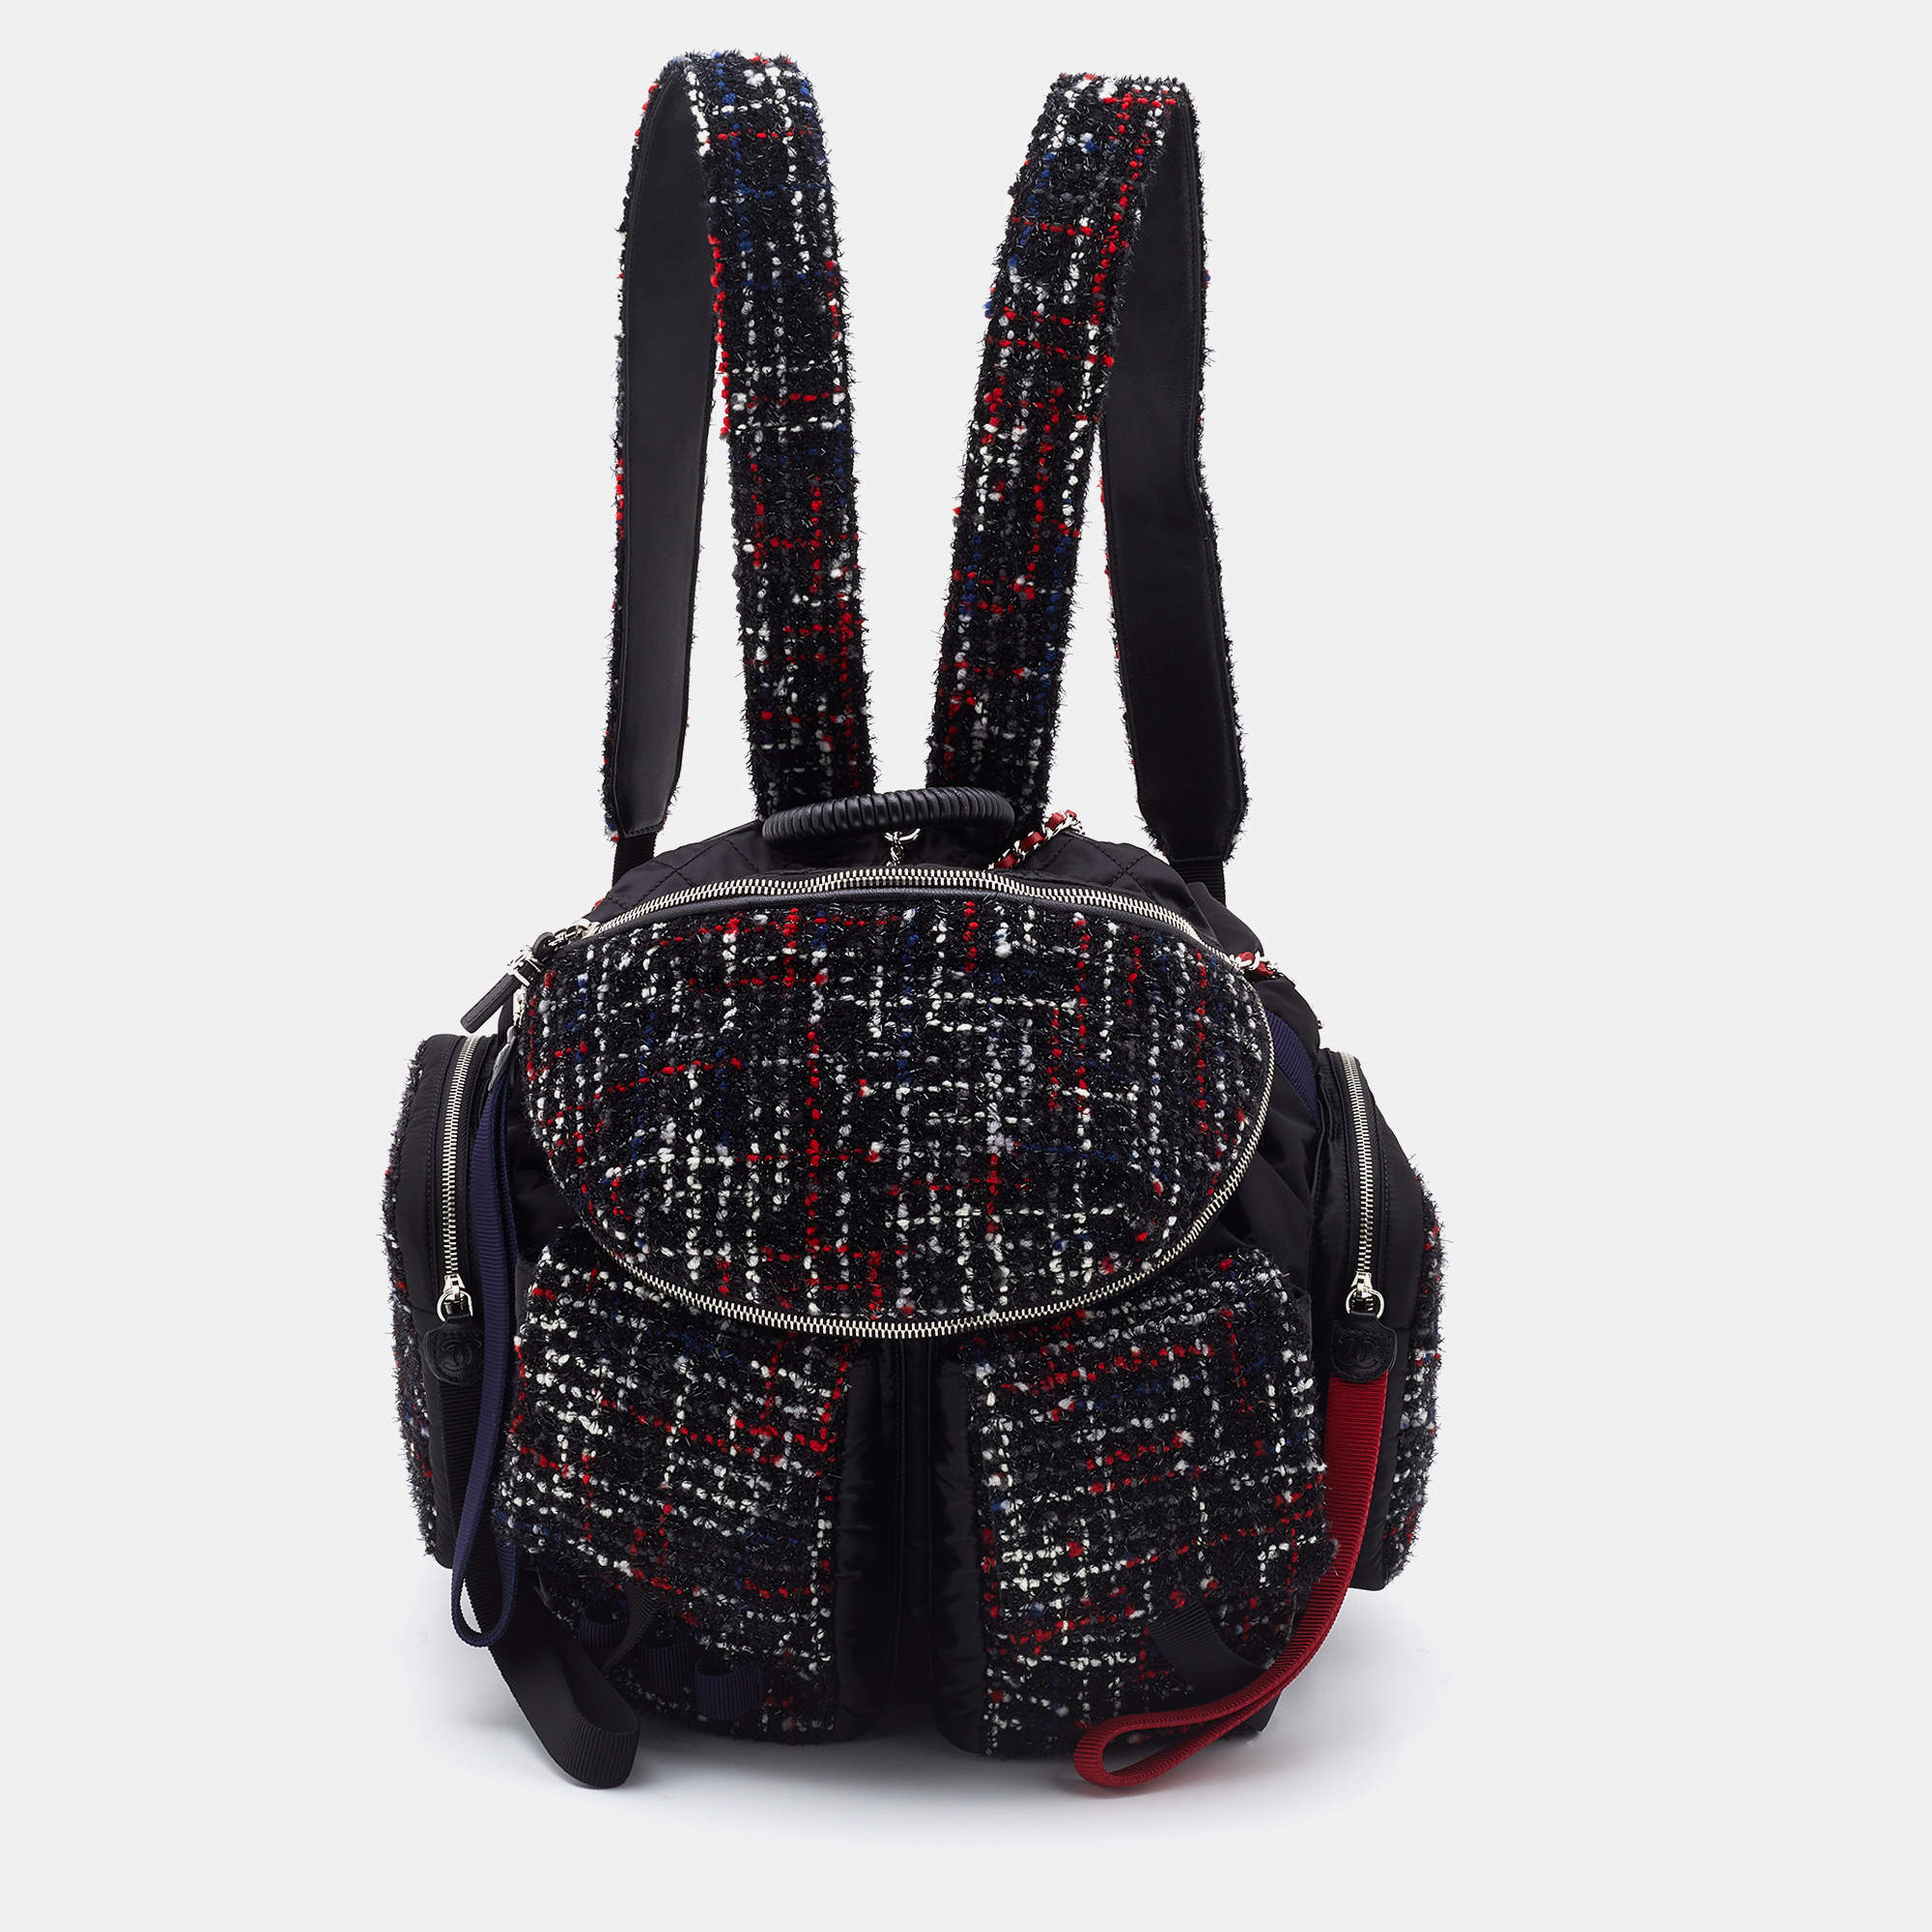 Chanel Black/Red Satin,Tweed and Leather Astronaut Essentials